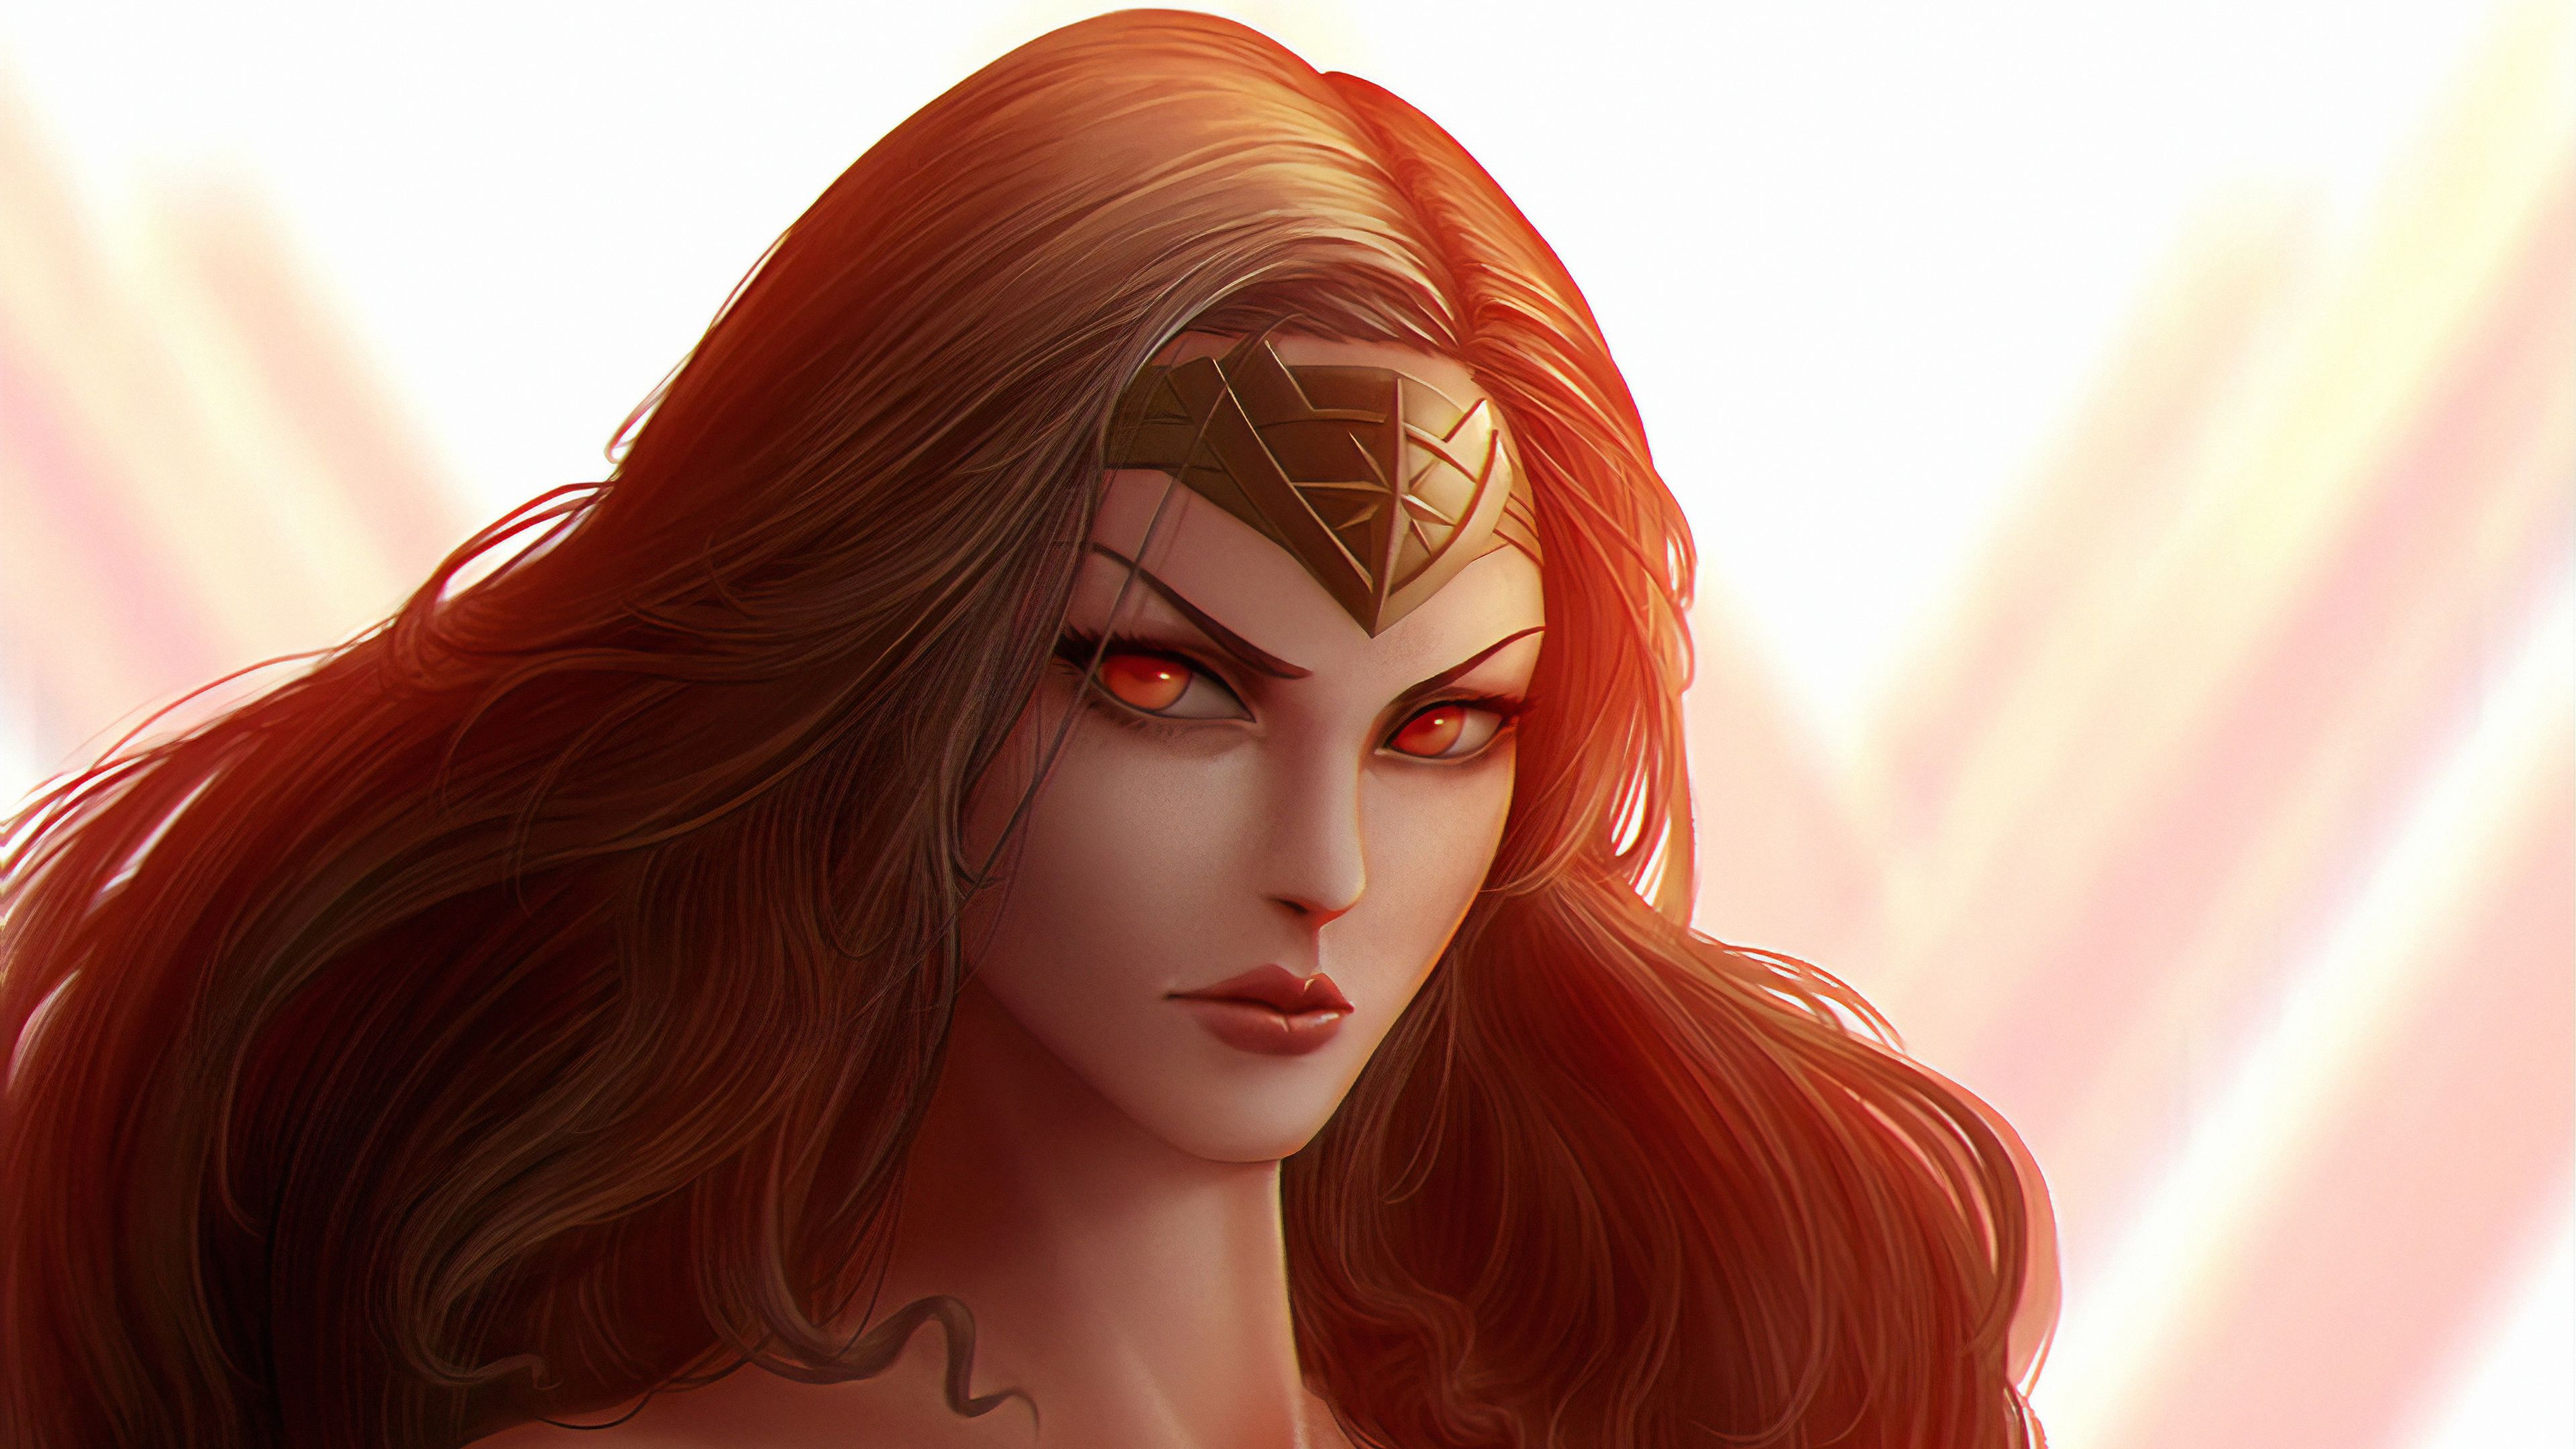 Wonder Woman Anger, HD Superheroes, 4k Wallpaper, Image, Background, Photo and Picture